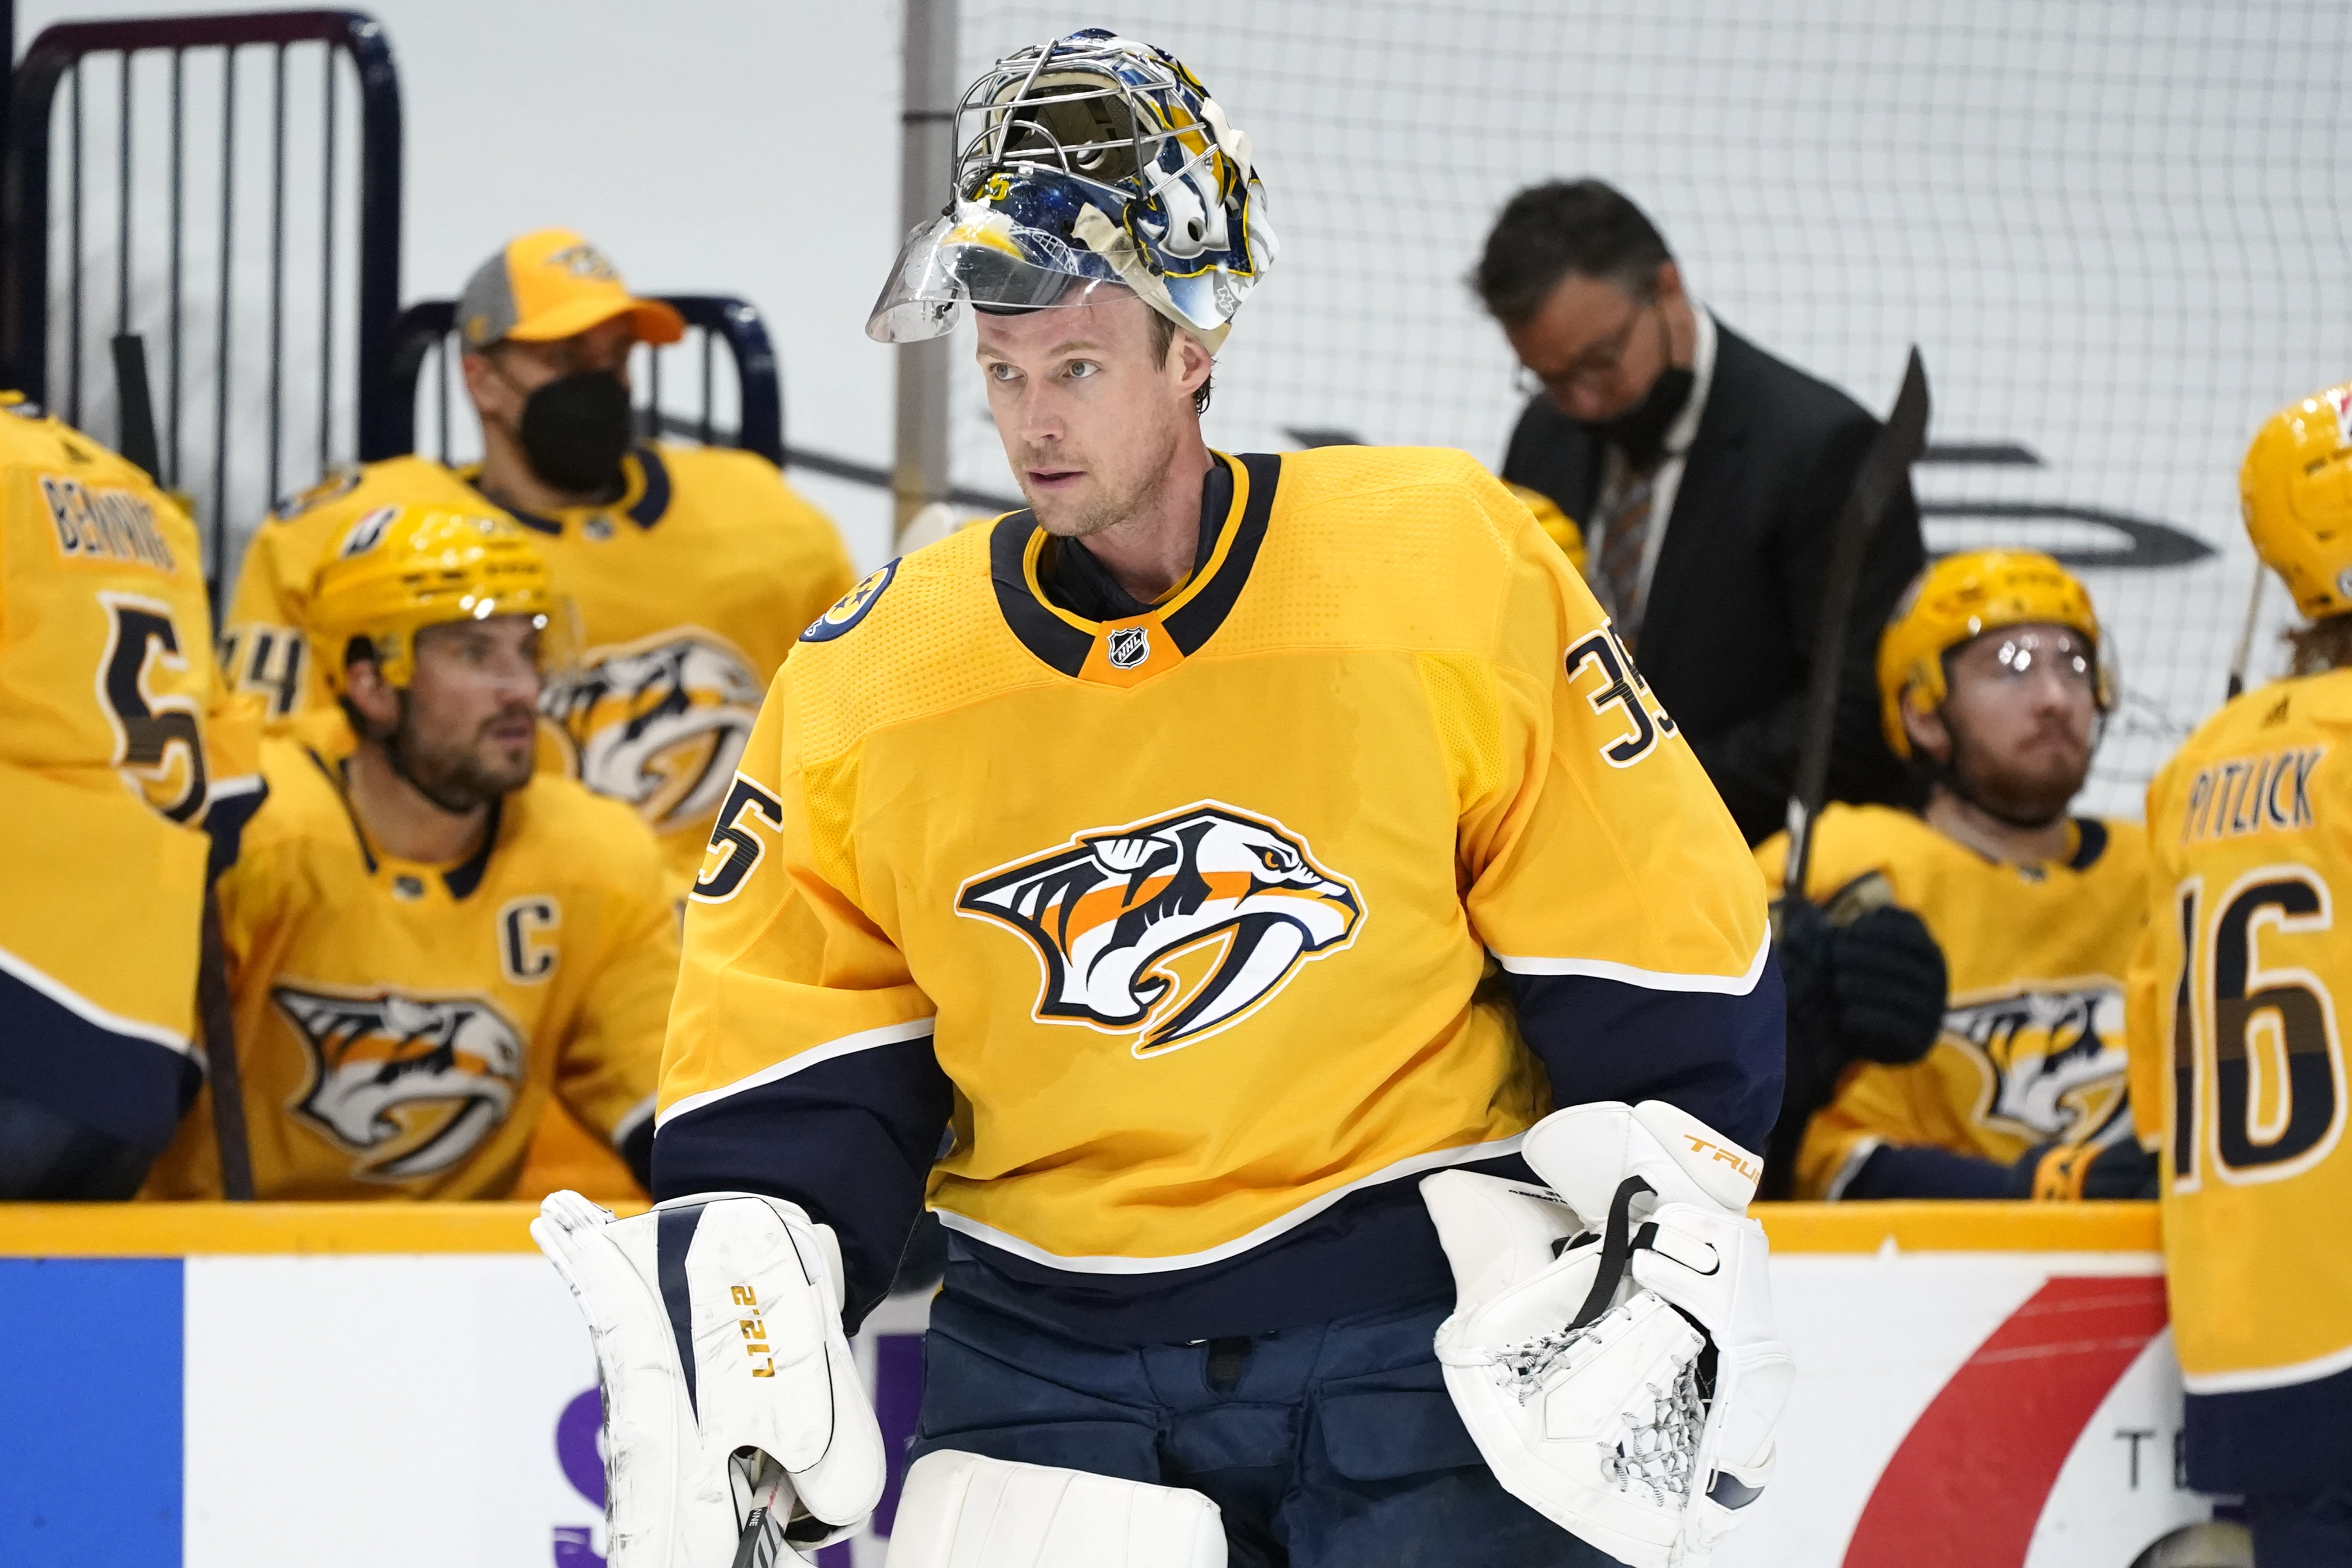 Pekka Rinne set to become first Predator to have number retired